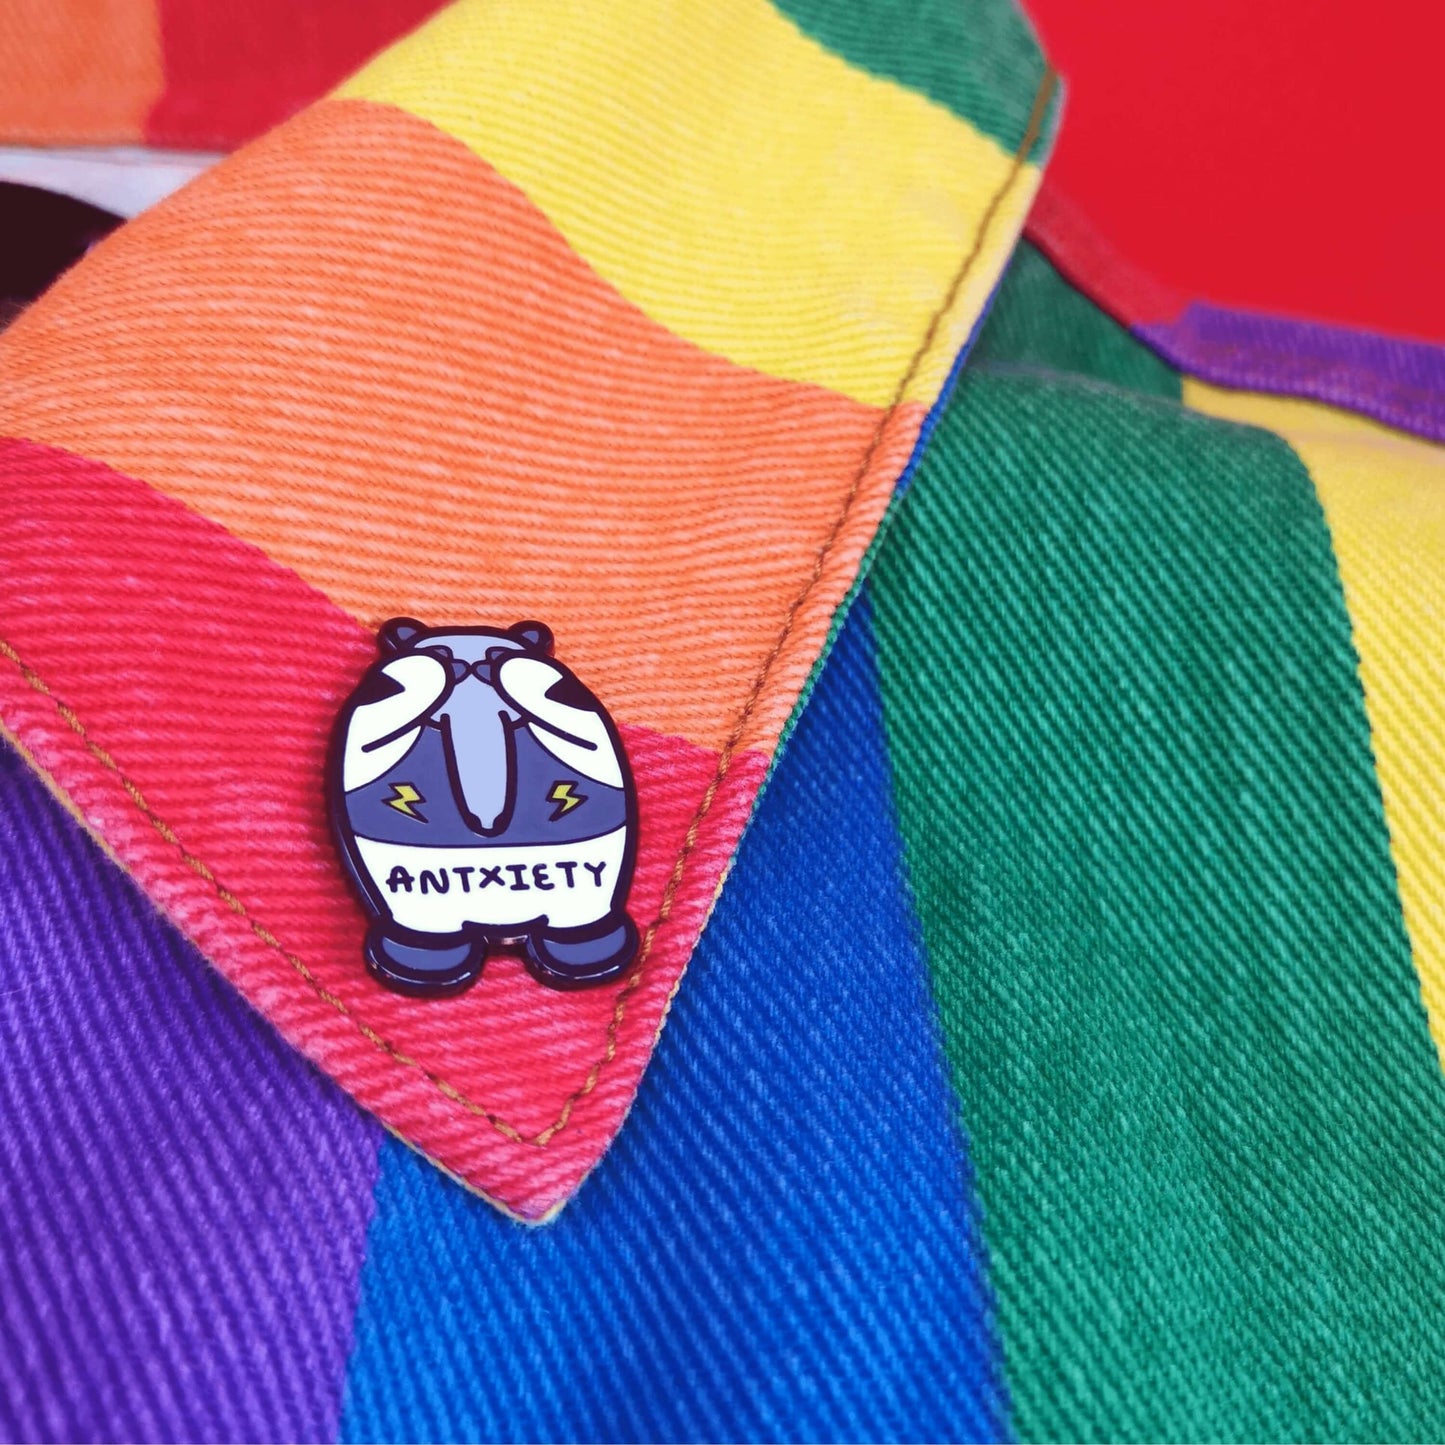 Antxiety Enamel Pin - Anxiety pinned on a rainbow jacket. The pin is a grey and white anteater with yellow lightning bolts and the word antxiety across its belly. The pin is designed to raise awareness for anxiety disorders and anxious emotions.